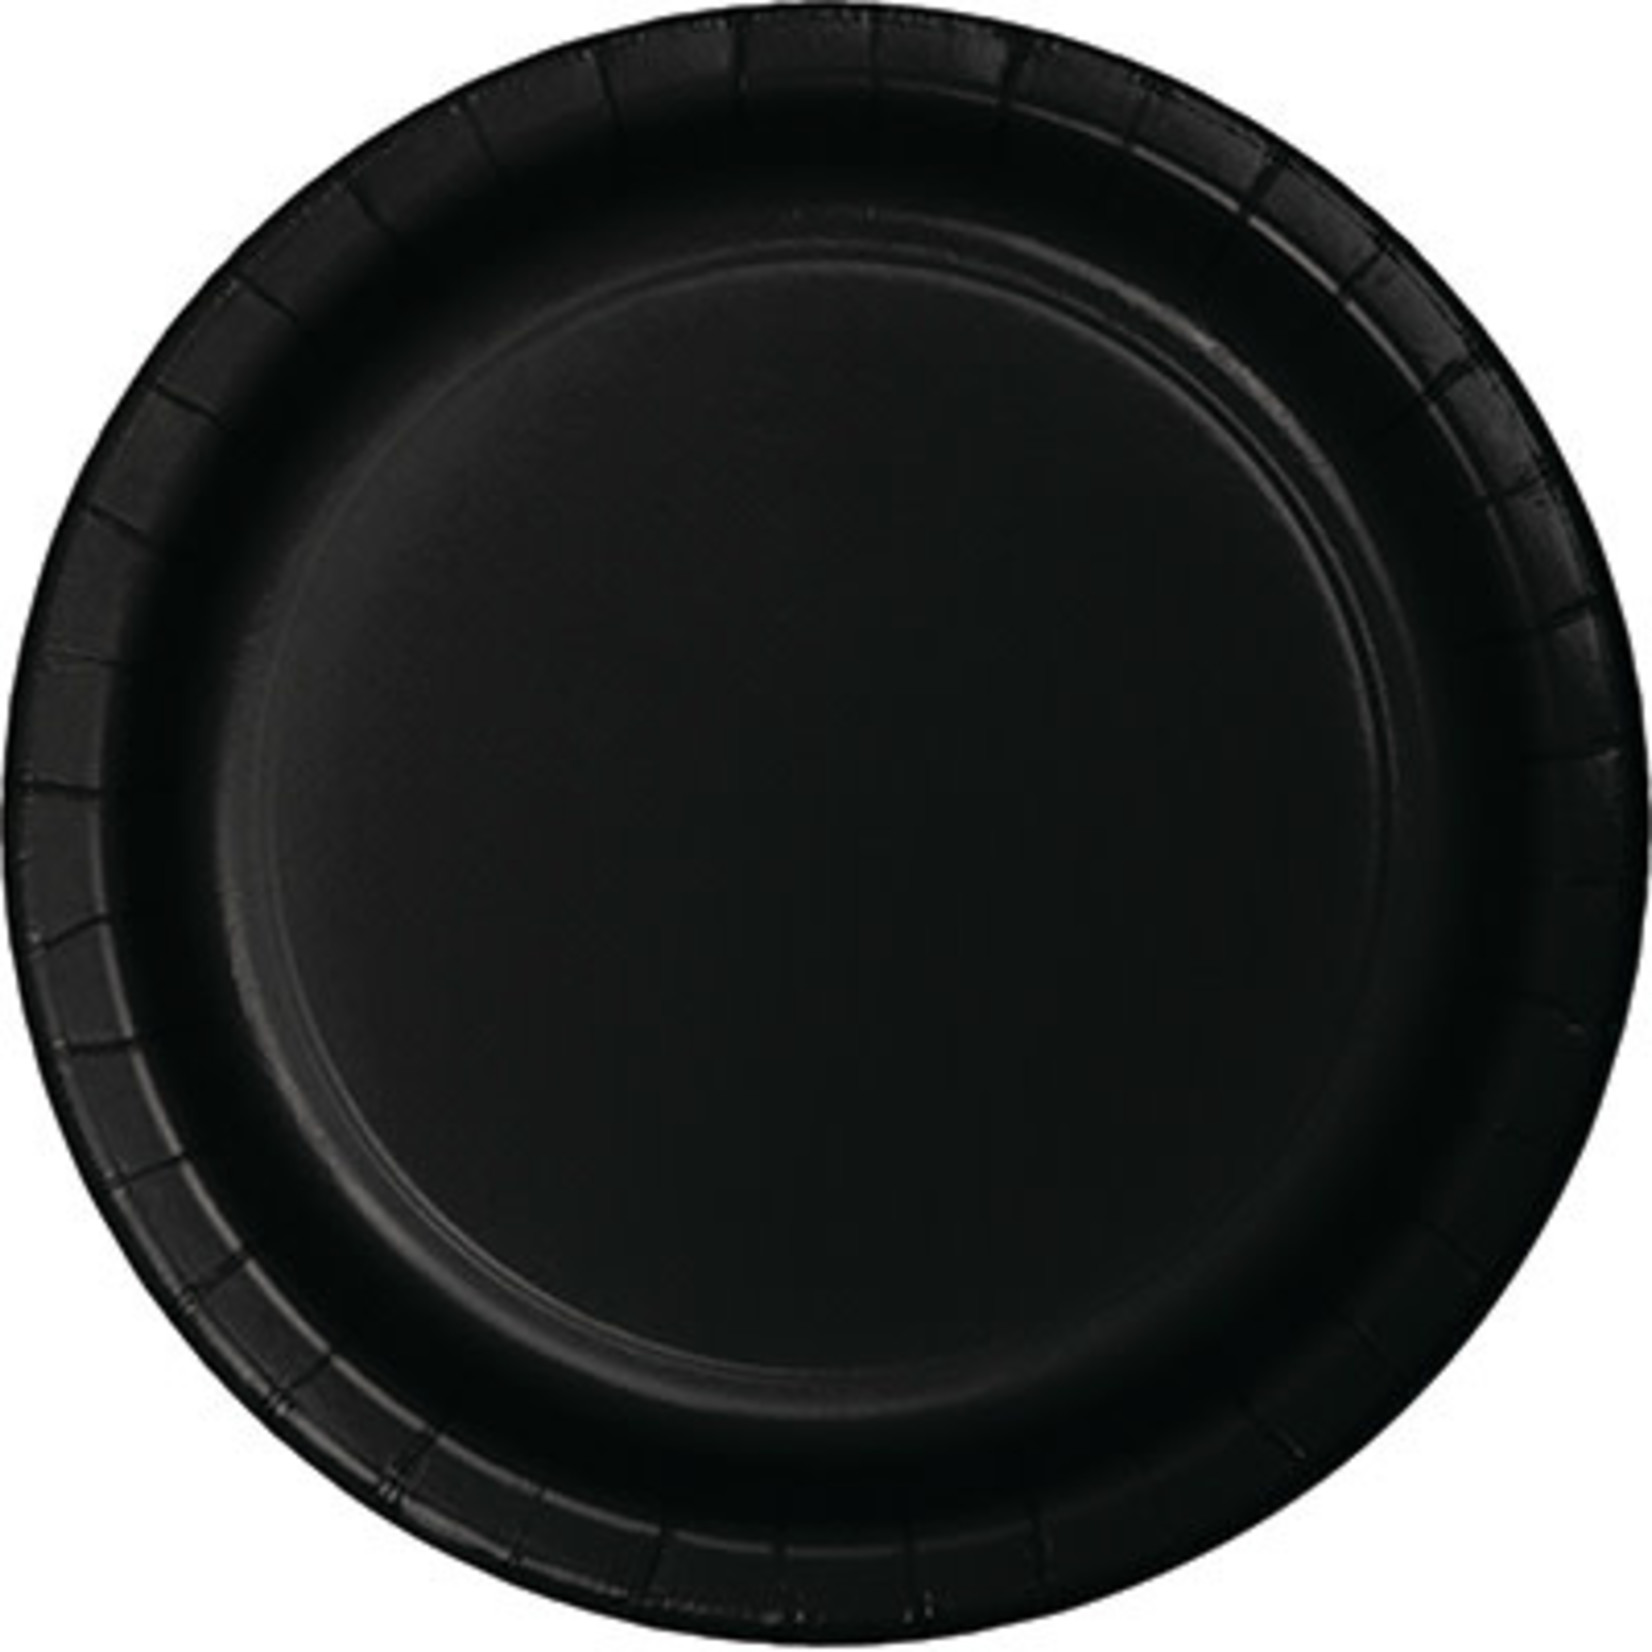 Touch of Color 10" Black Paper Banquet Plates - 24ct.